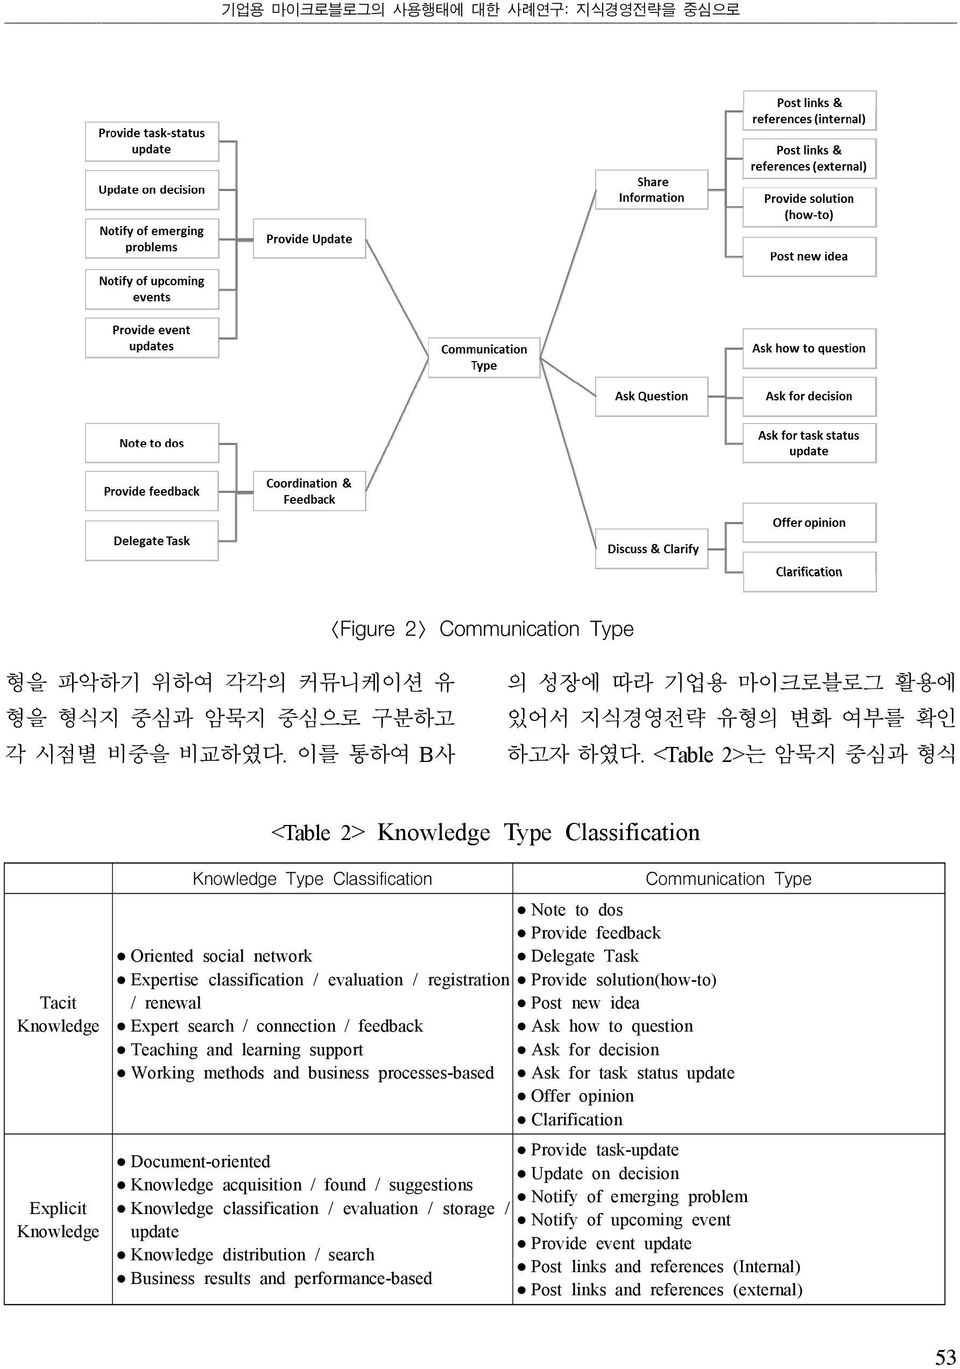 <Table 2>는 암묵지 중심과 형식 Tacit Knowledge Explicit Knowledge <Table 2> Knowledge Type Classification Knowledge Type Classification Communication Type Note to dos Provide feedback Oriented social network